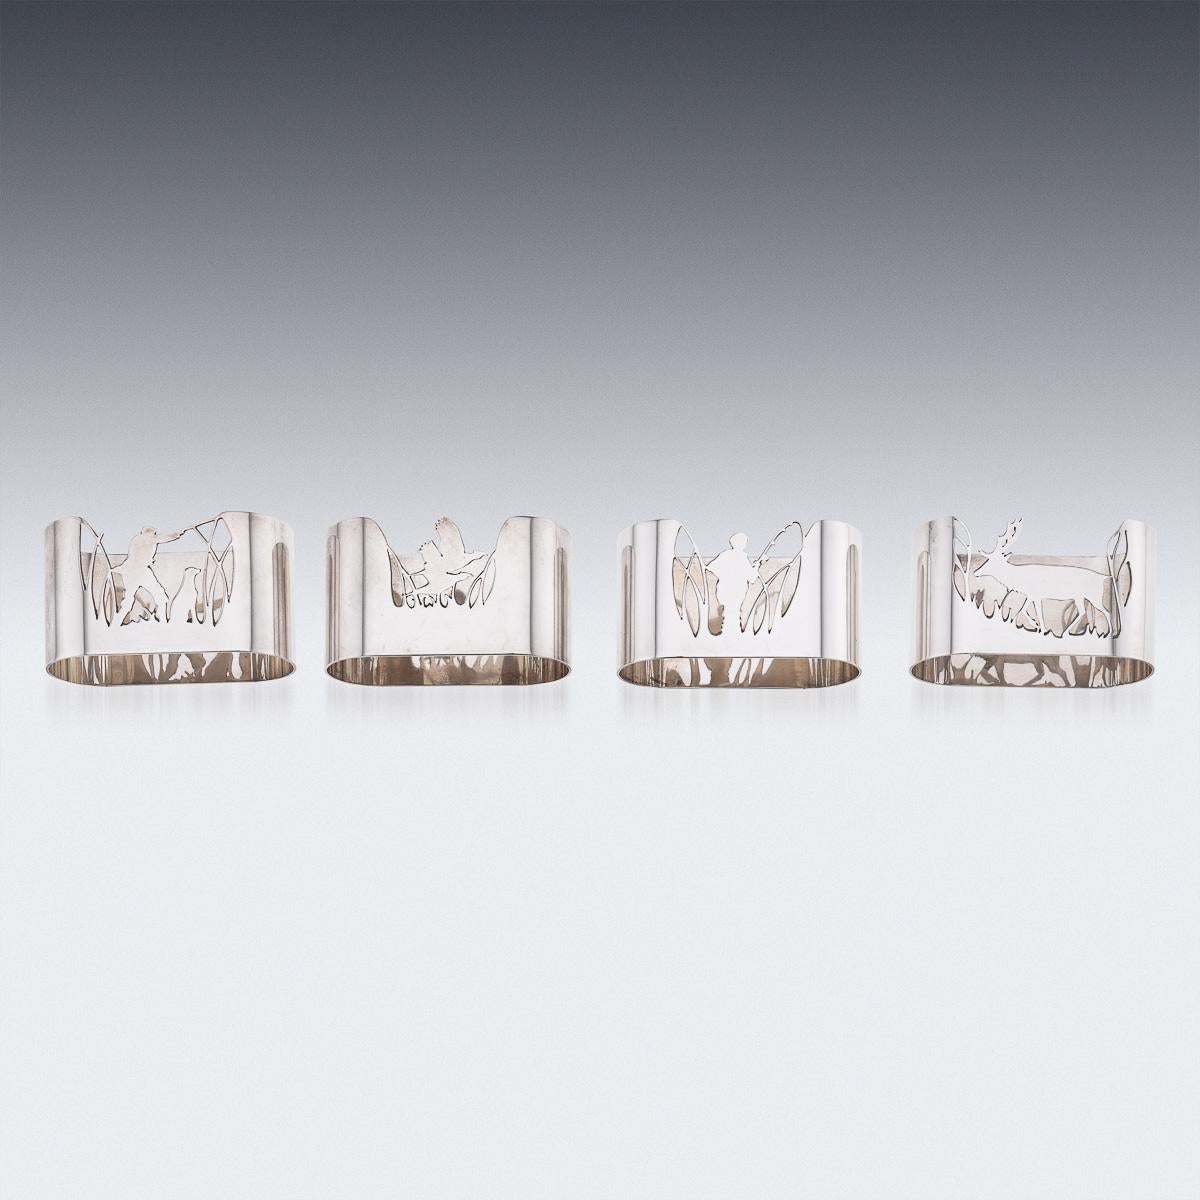 20th Century stunning set of four solid silver napkin holders. Each napkin holder is pierced depicting a hunter and stag, fisherman and game birds. The set comes in an original retail case. Each napkin holder is hallmarked English silver (925